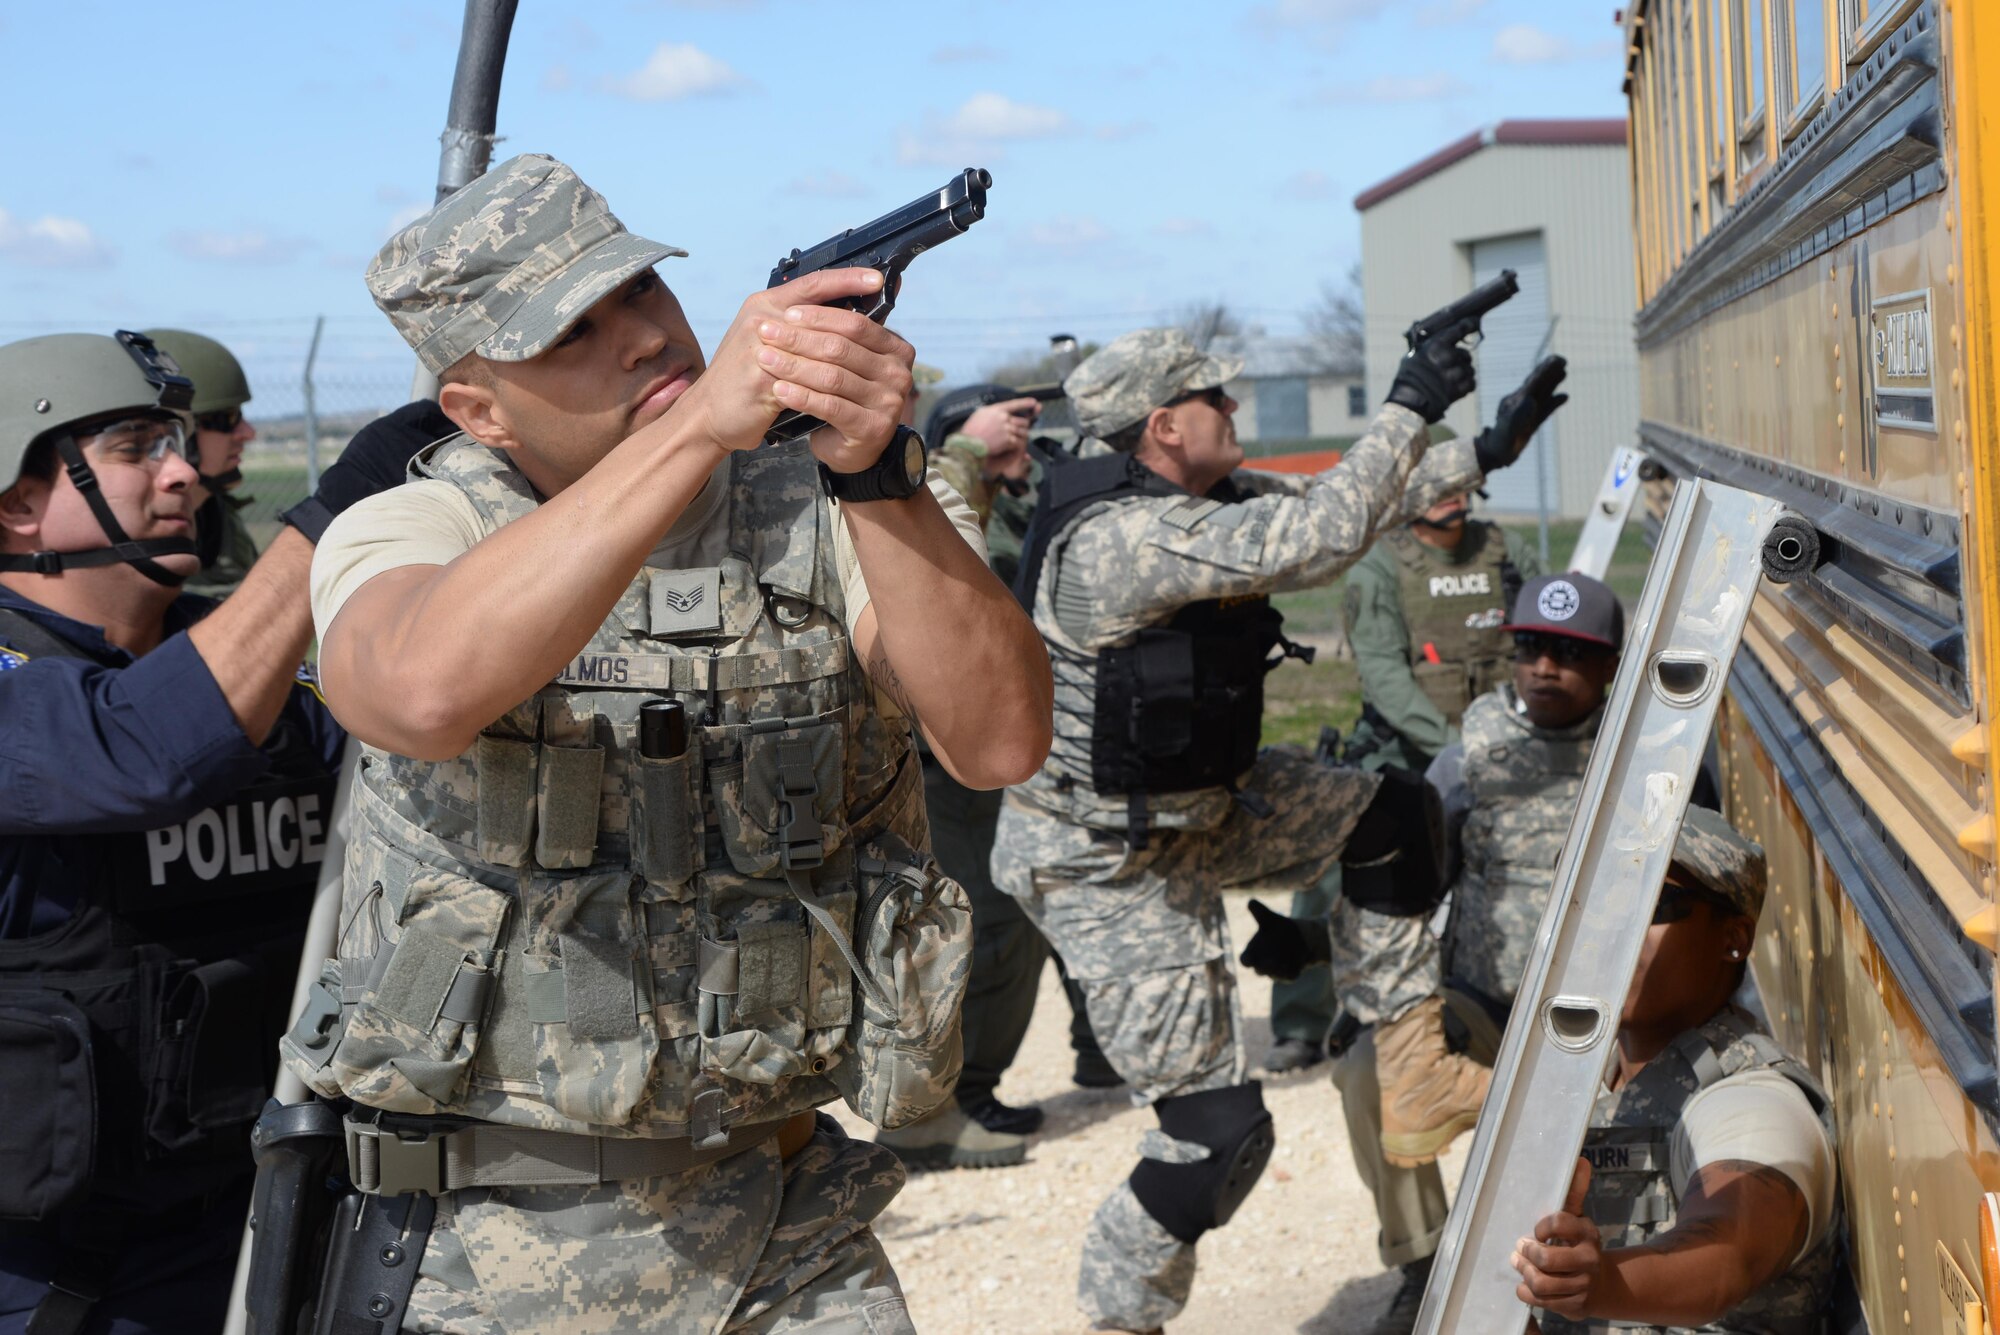 Staff Sgt. Paul Olmos III, 802nd Security Forces Squadron military working dog handler, leads members from the 902nd and 802nd SFS with members of local police departments during a bus assault and hostage rescue exercise Feb. 19, 2015 at Joint Base San Antonio-Randolph, Texas. The local agencies involved in the exercise were from the cities of Live, Oak Universal City and Converse and the Judson Independent School District Police Departments. Security Forces and local police departments trained together to prepare for emergencies that require both military and civilian response efforts. (U.S. Air Force photo by Airman 1st Class Stormy Archer)